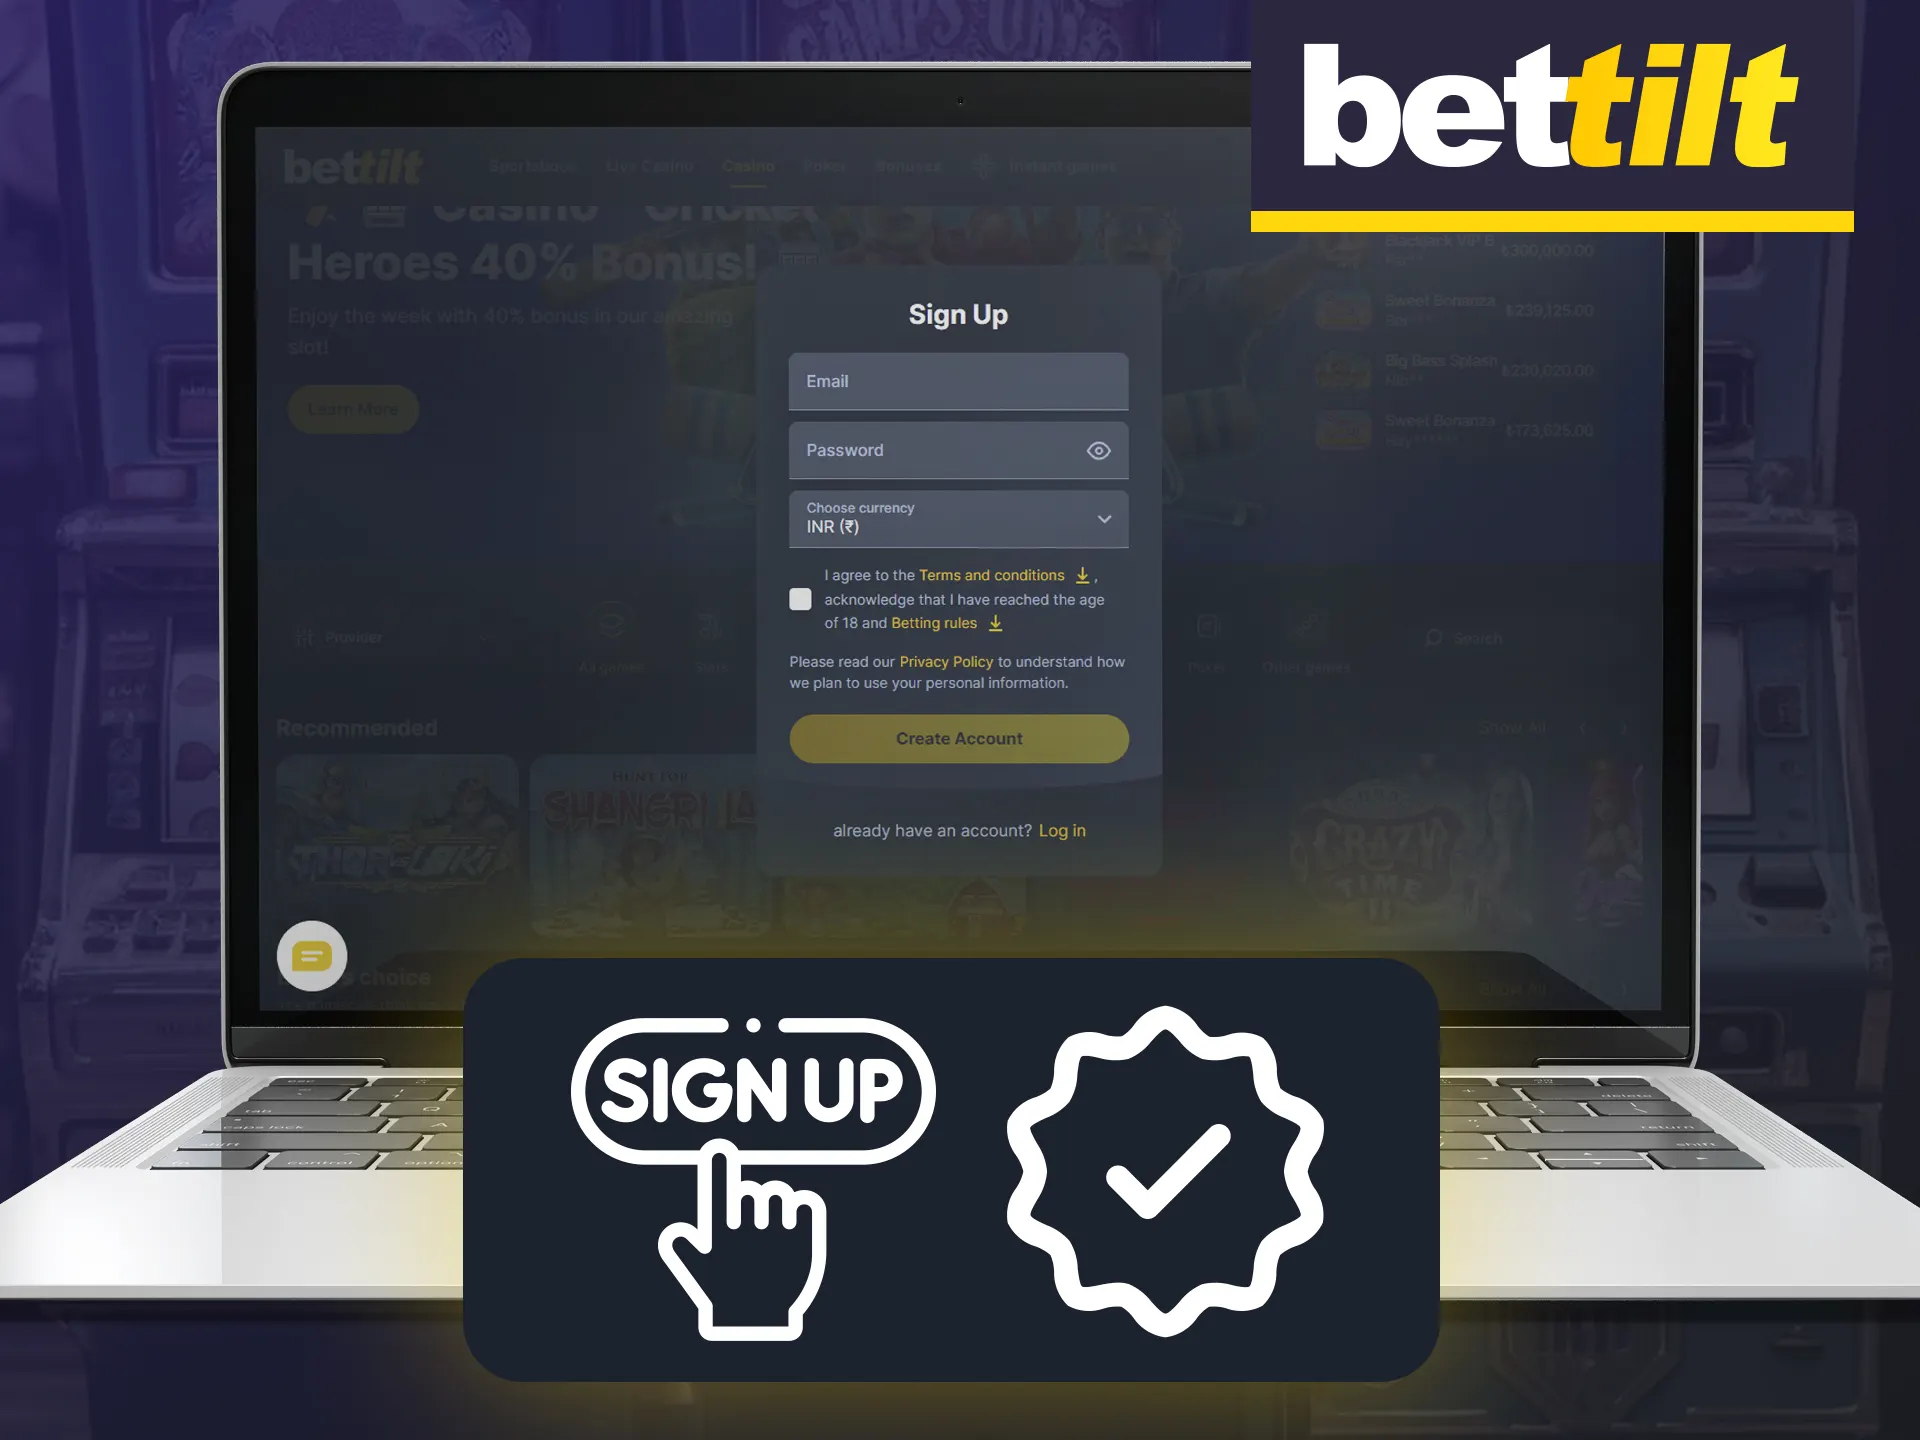 Register at Bettilt for safe and responsible gaming.